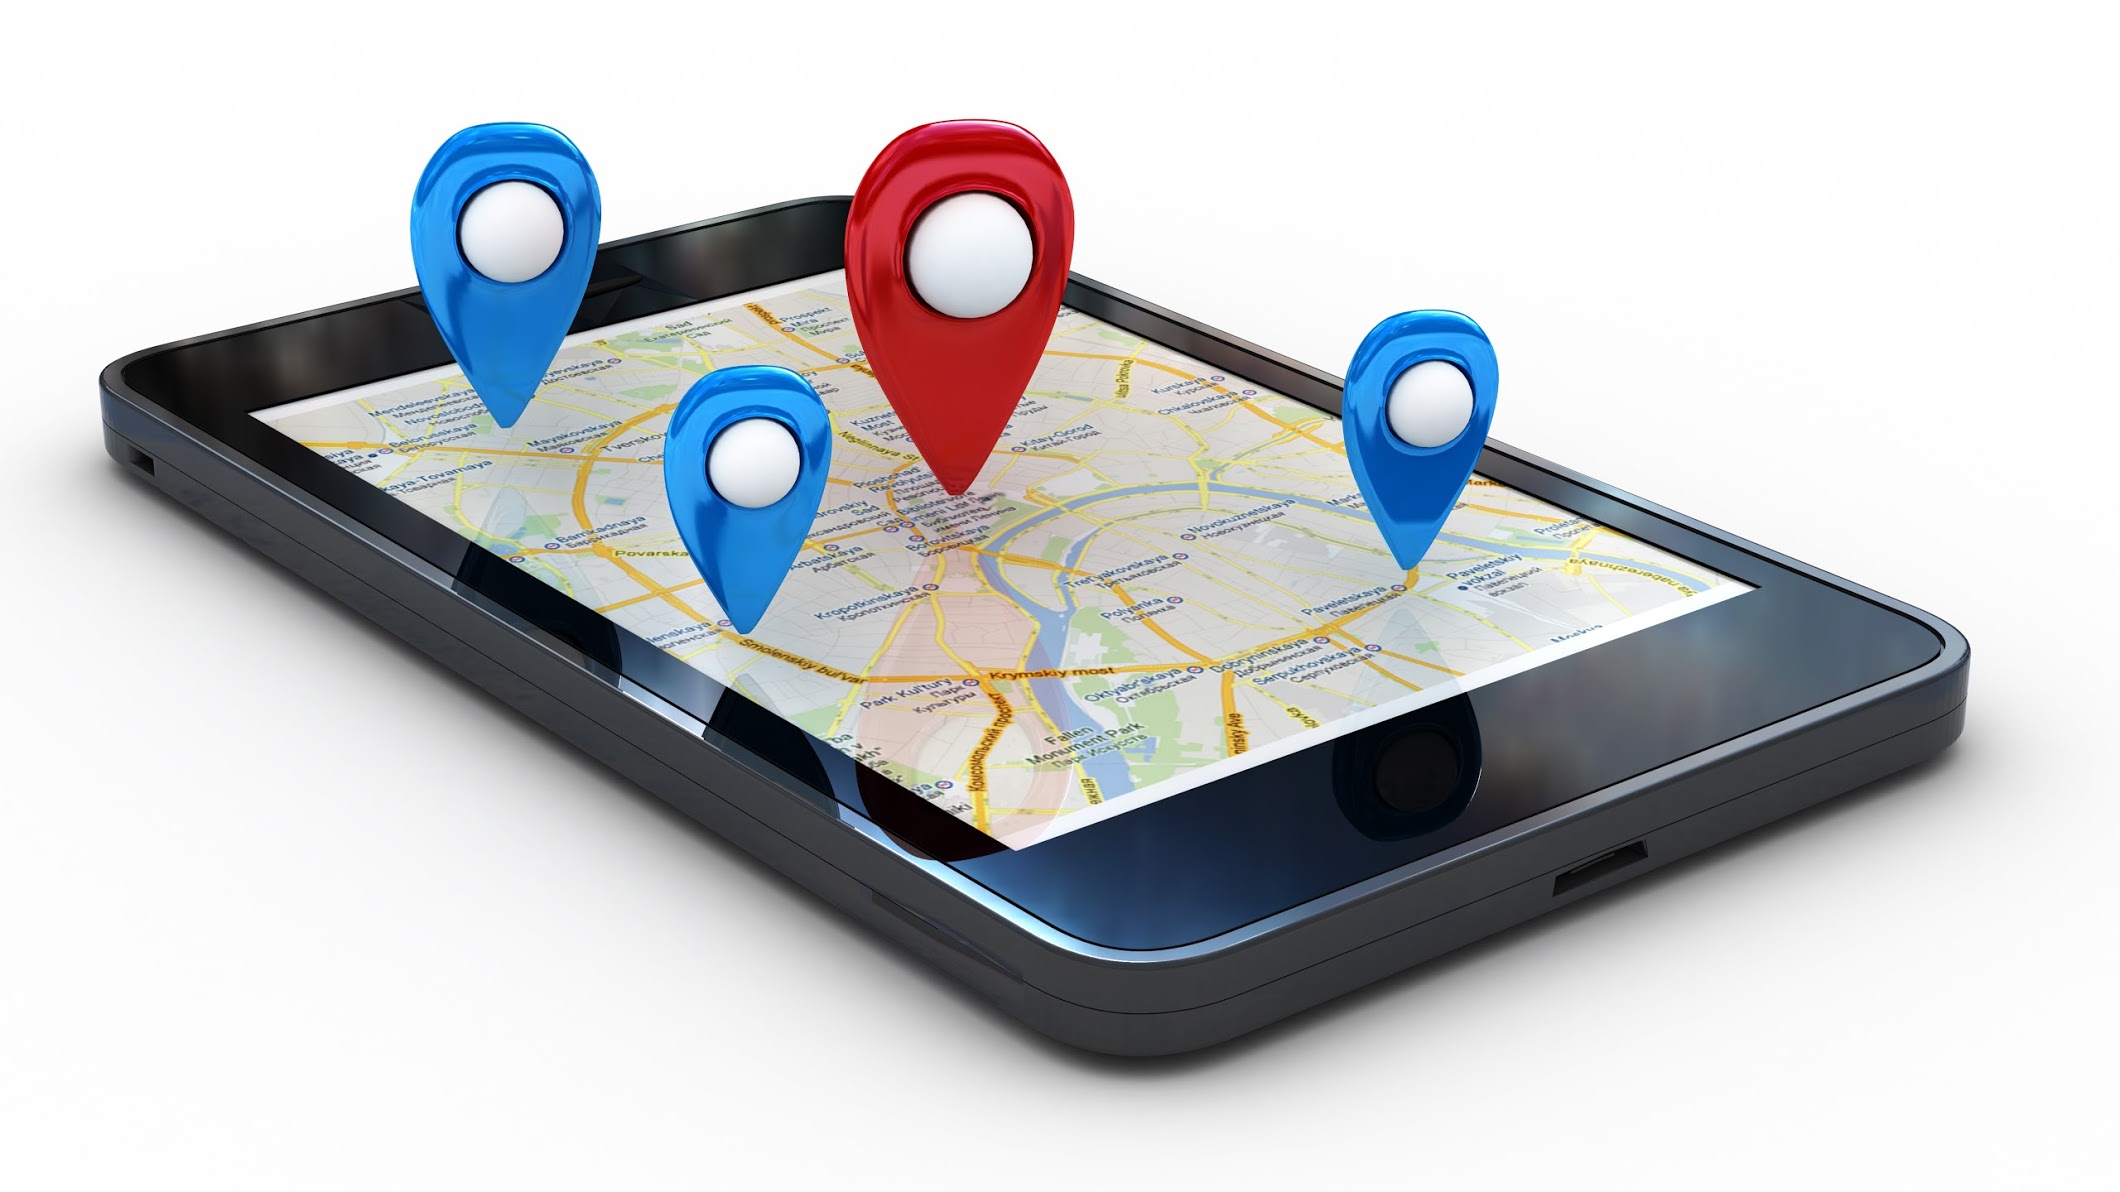 How To Track A Cell Phone Using Mobile Tracker Apps Devices